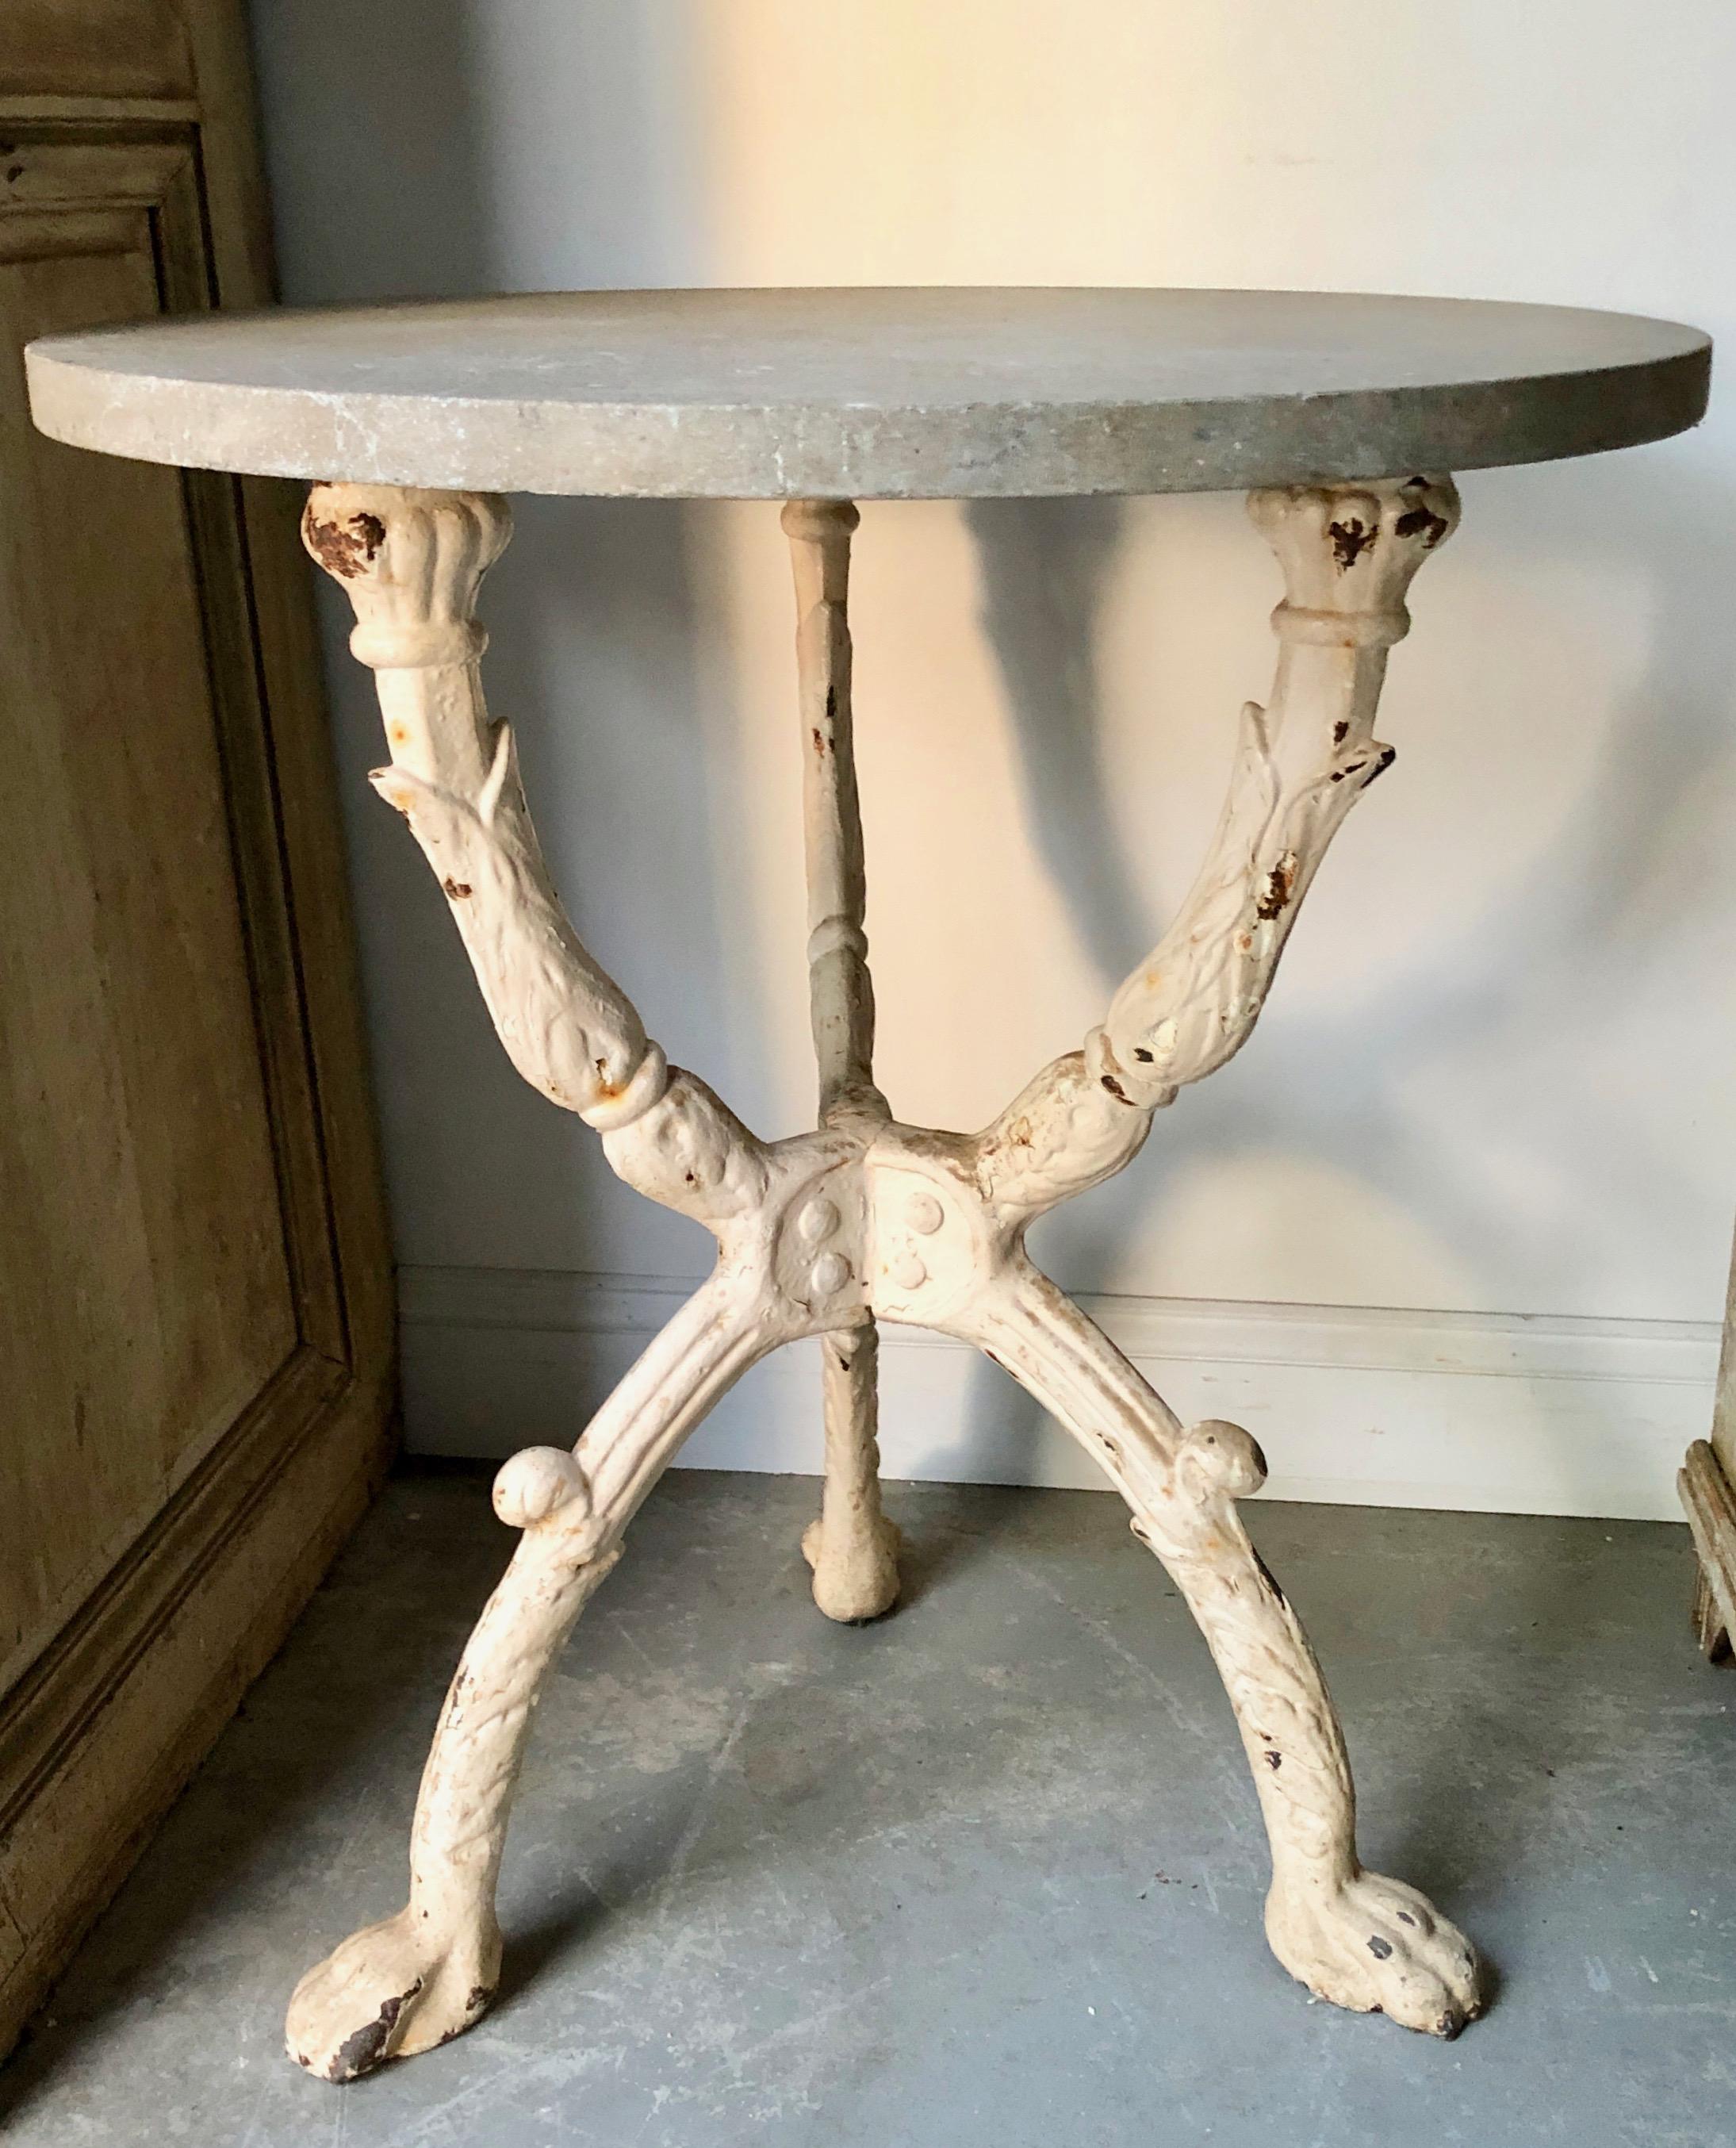 Nicely weathered 19th century French iron Bistro table with round stone top.
 